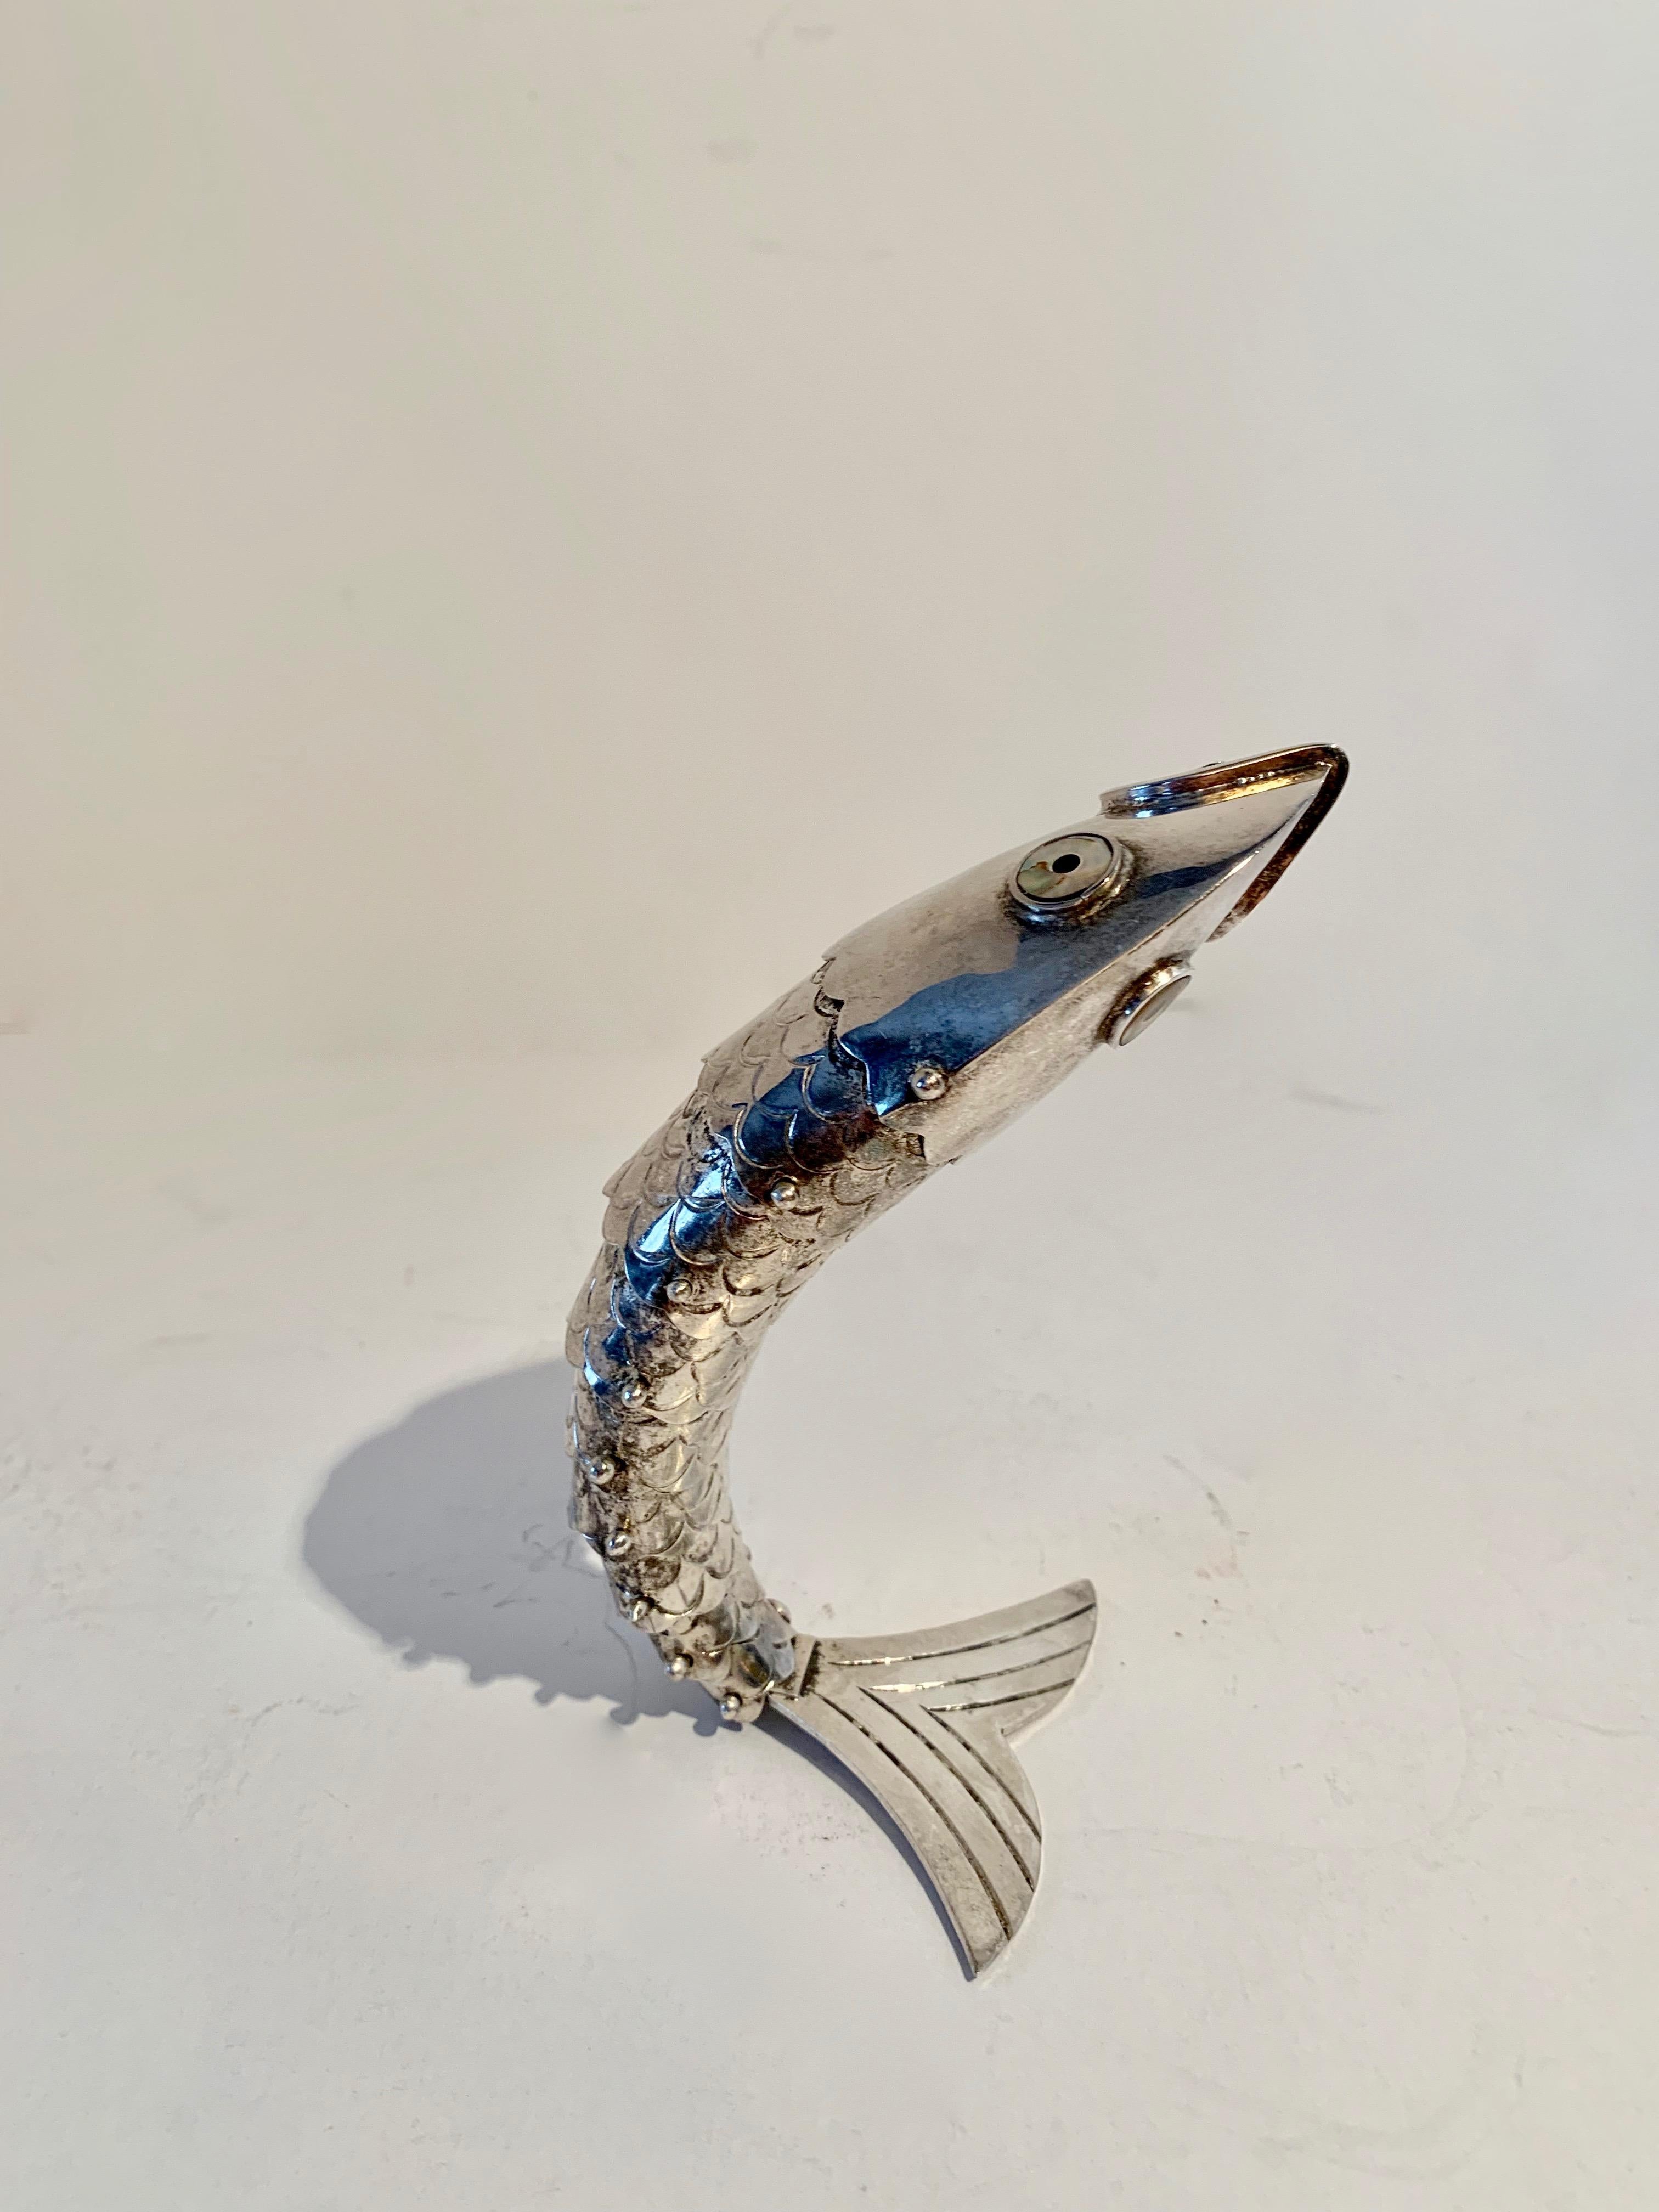 20th Century Silver Plate Mexican Articulated Fish Bottle Opener